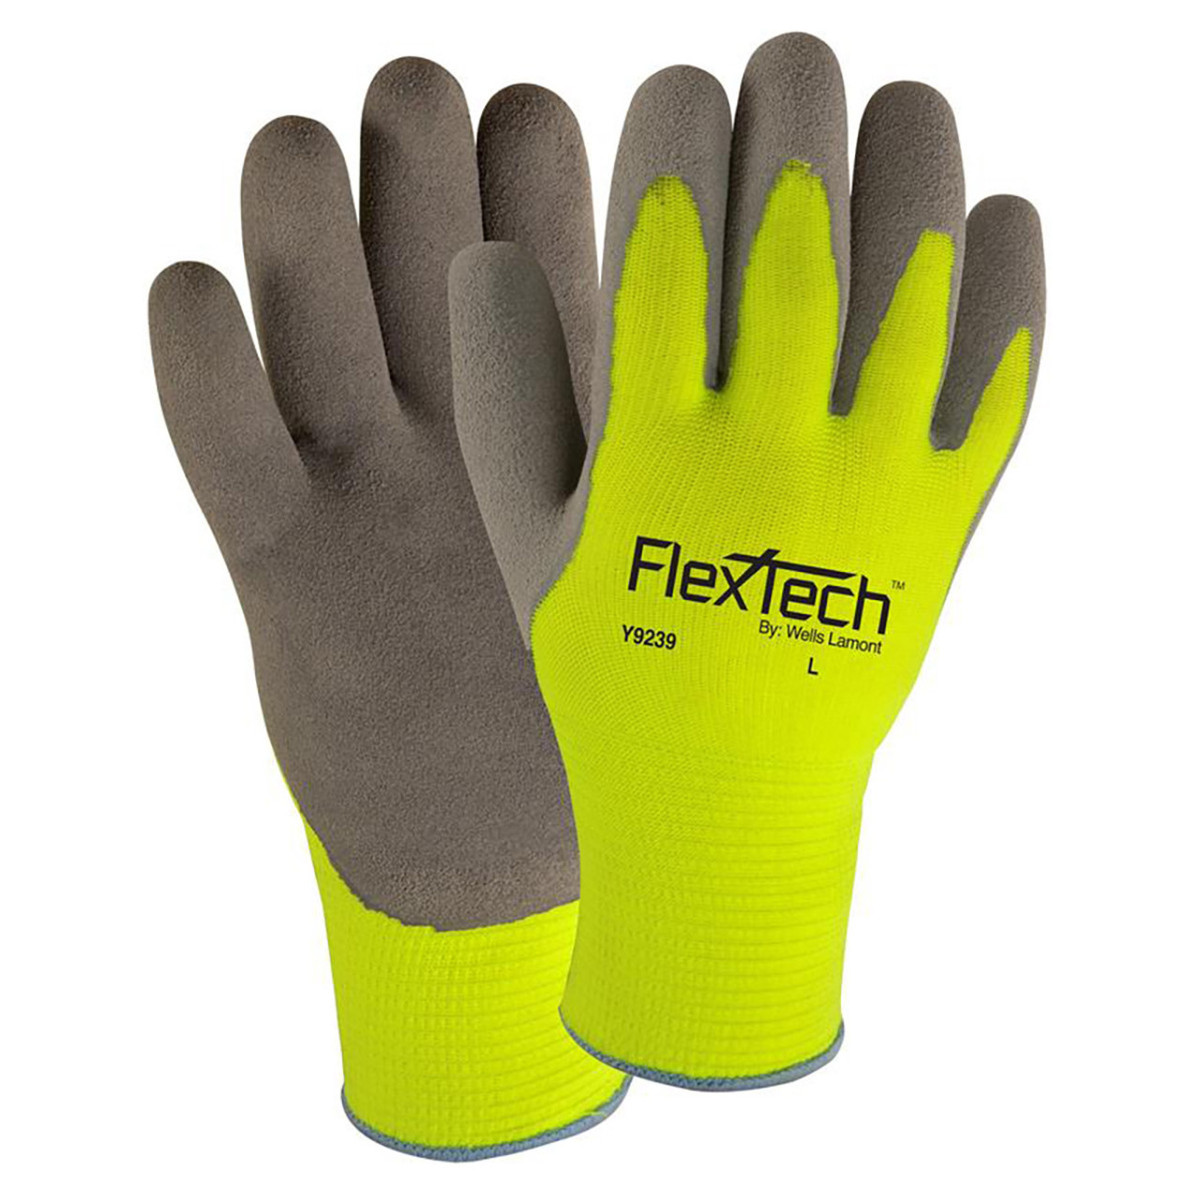 Work Gloves Women Men, Synthetic Leather with Silicone Grip Coating  Mechanic Glove, Breathable Utility DIY Gloves